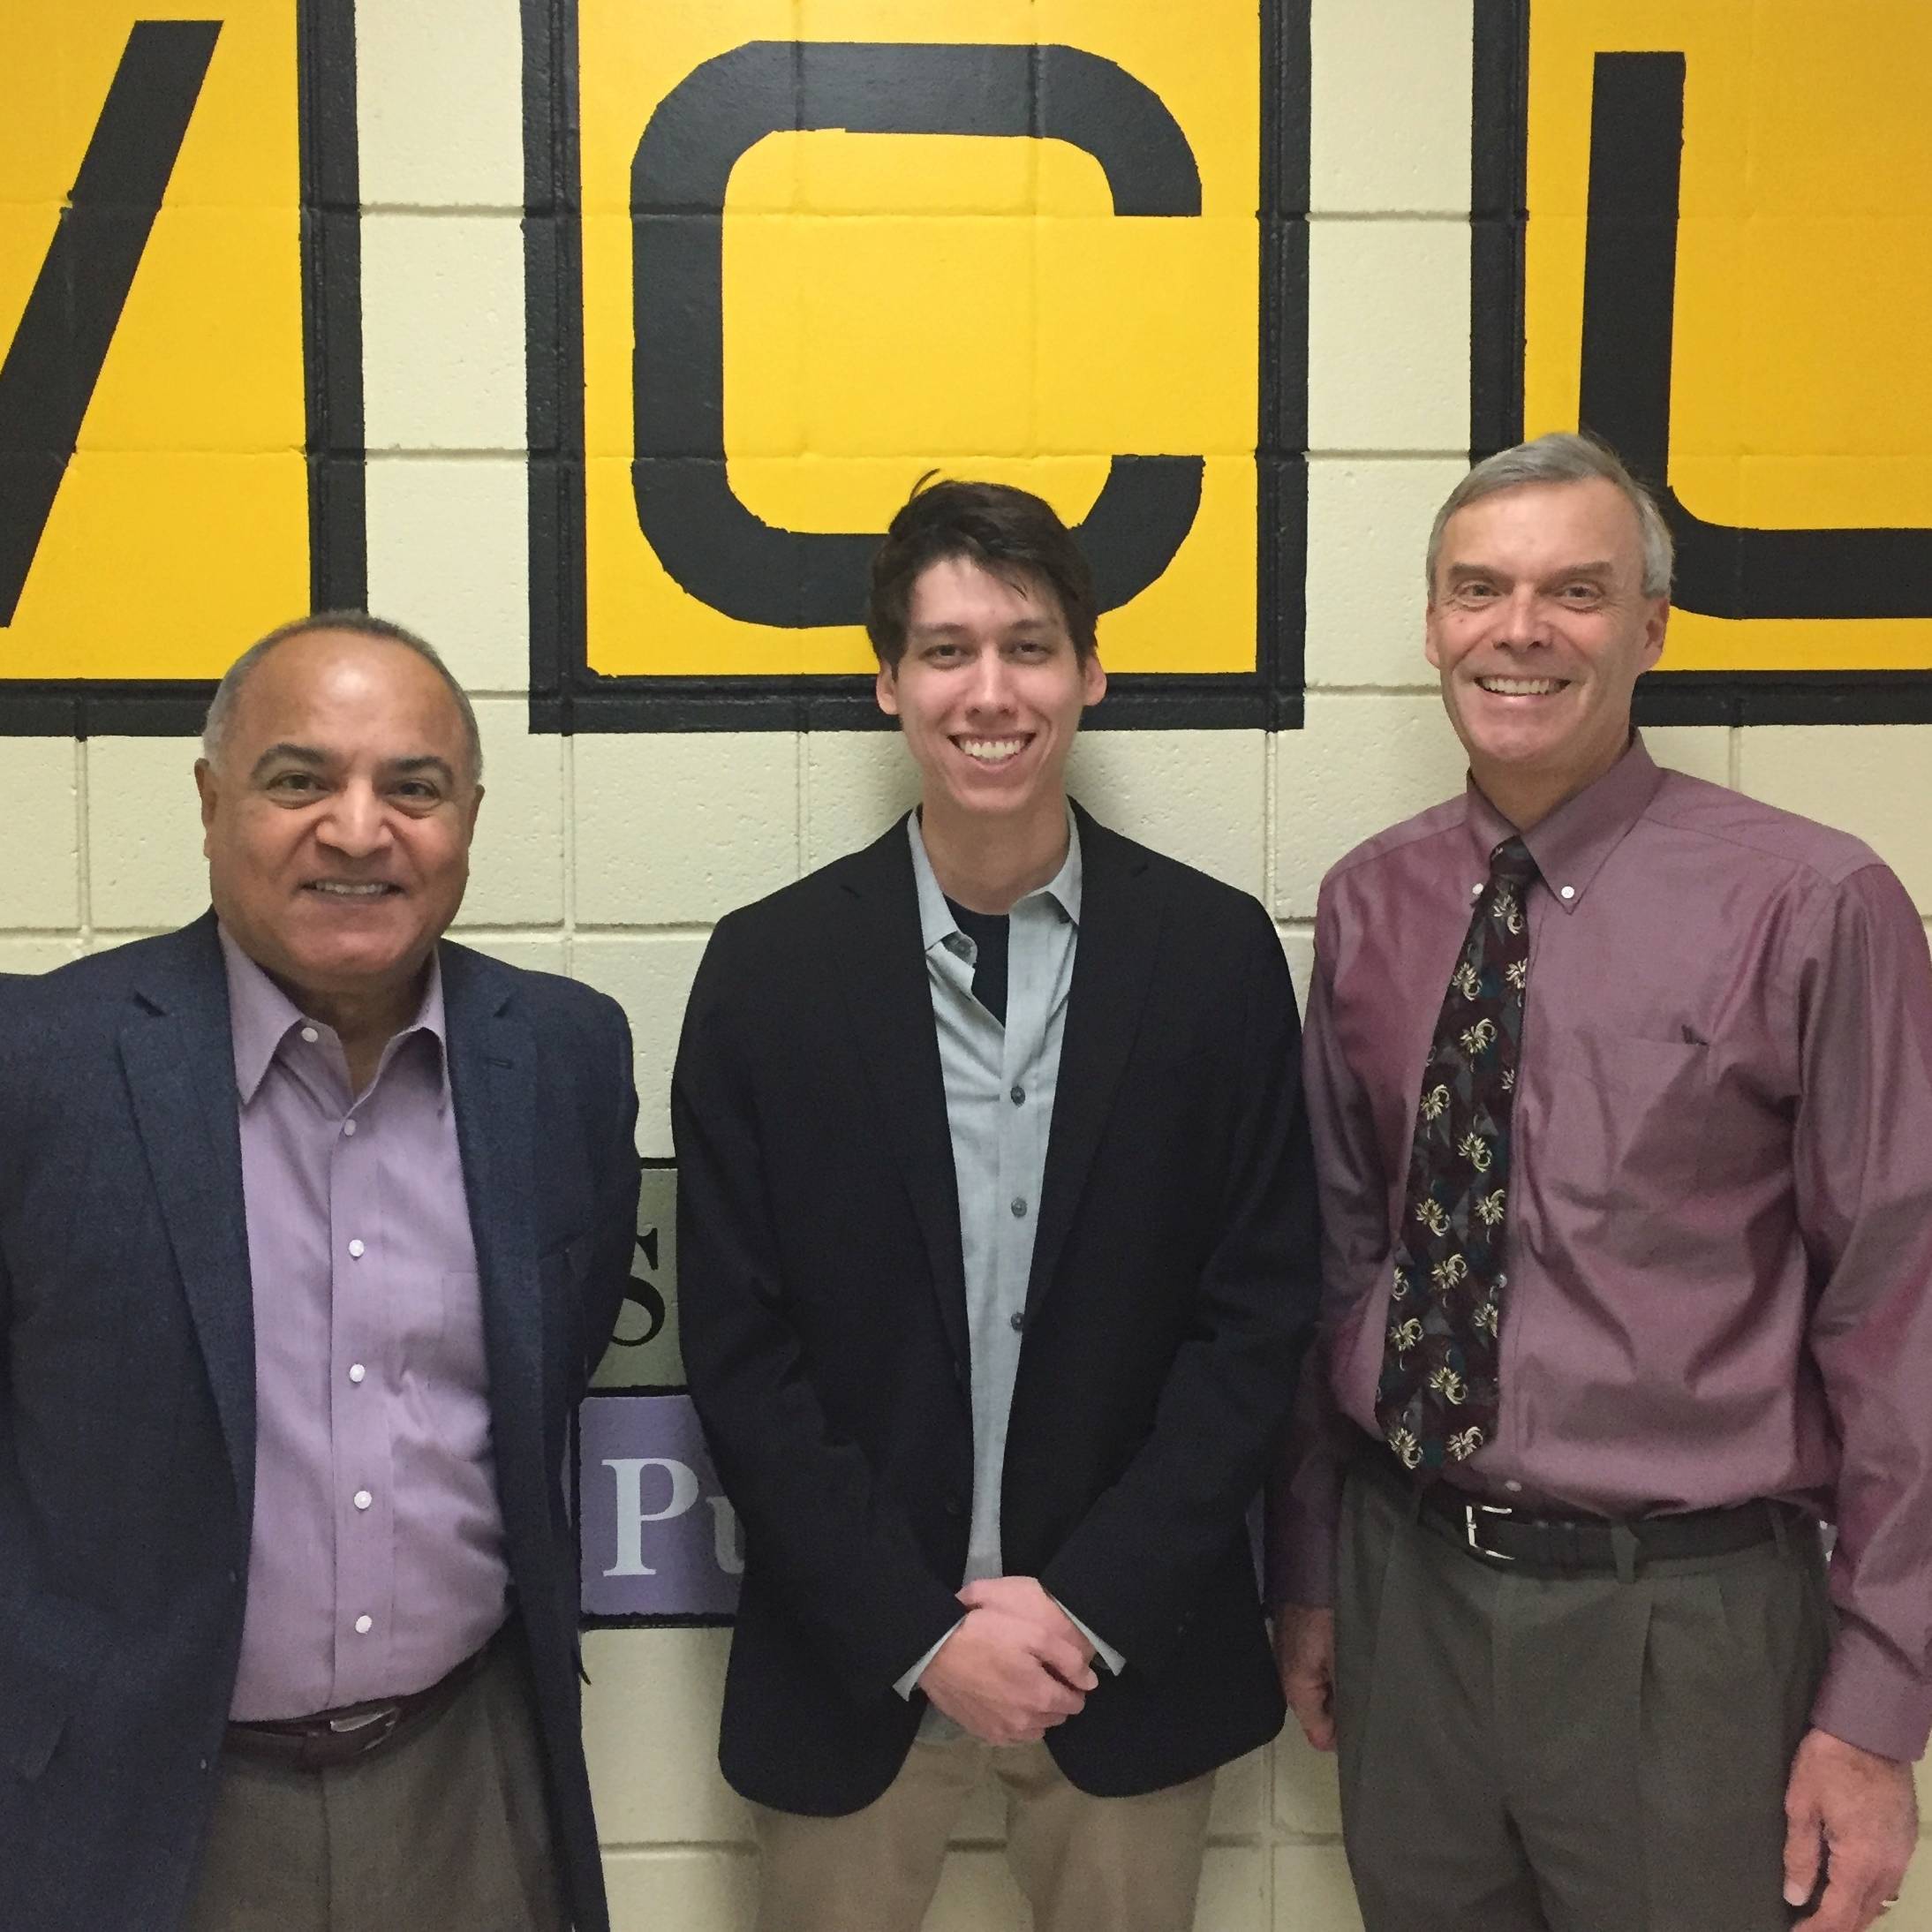 Samy El-Shall, Kevin Theisen and Scott Gronert pose in front of a mural in the department of chemistry.